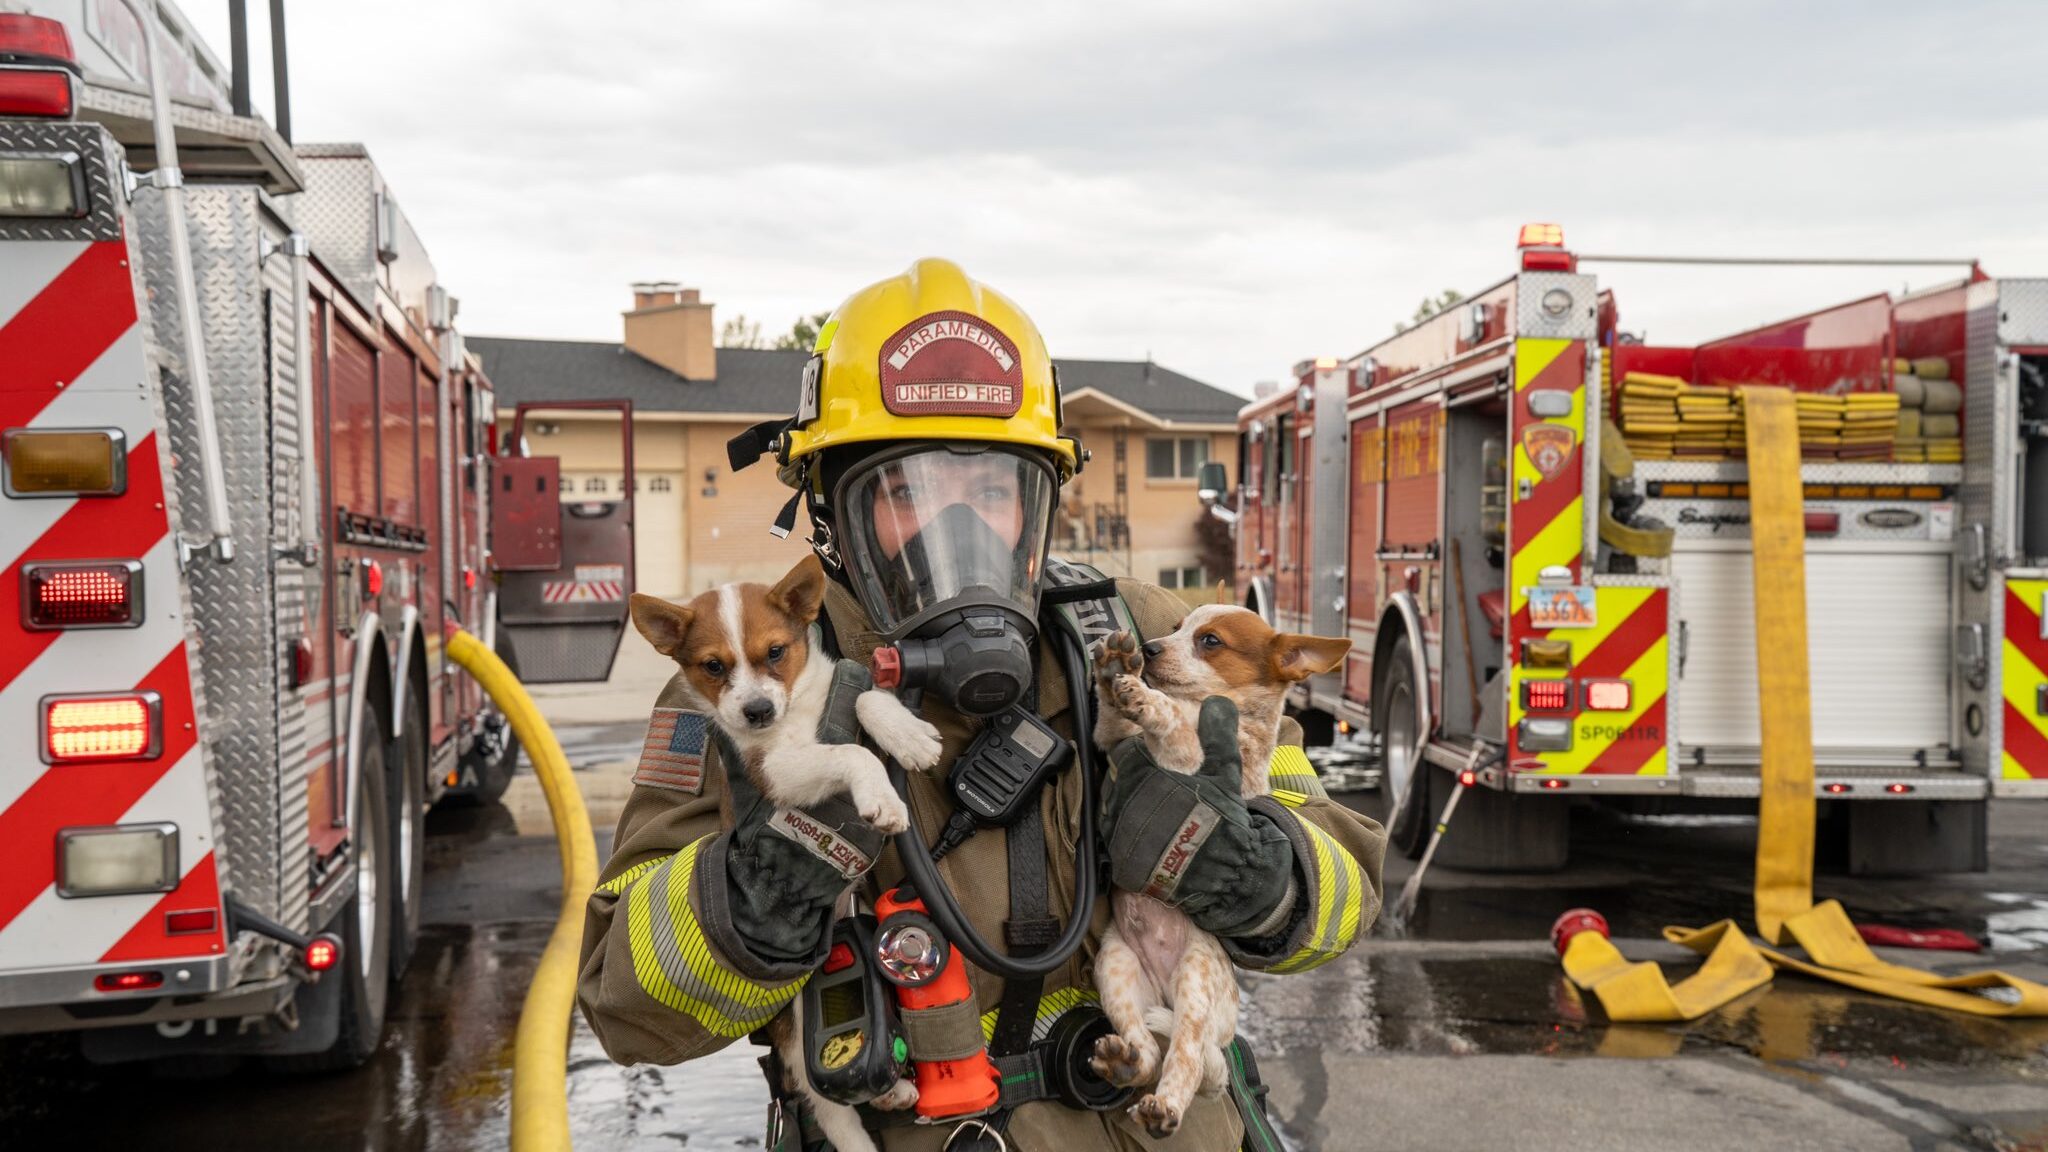 Image of a Unified Firefighter helping to save one of four dogs injured by smoke in a house fire. F...